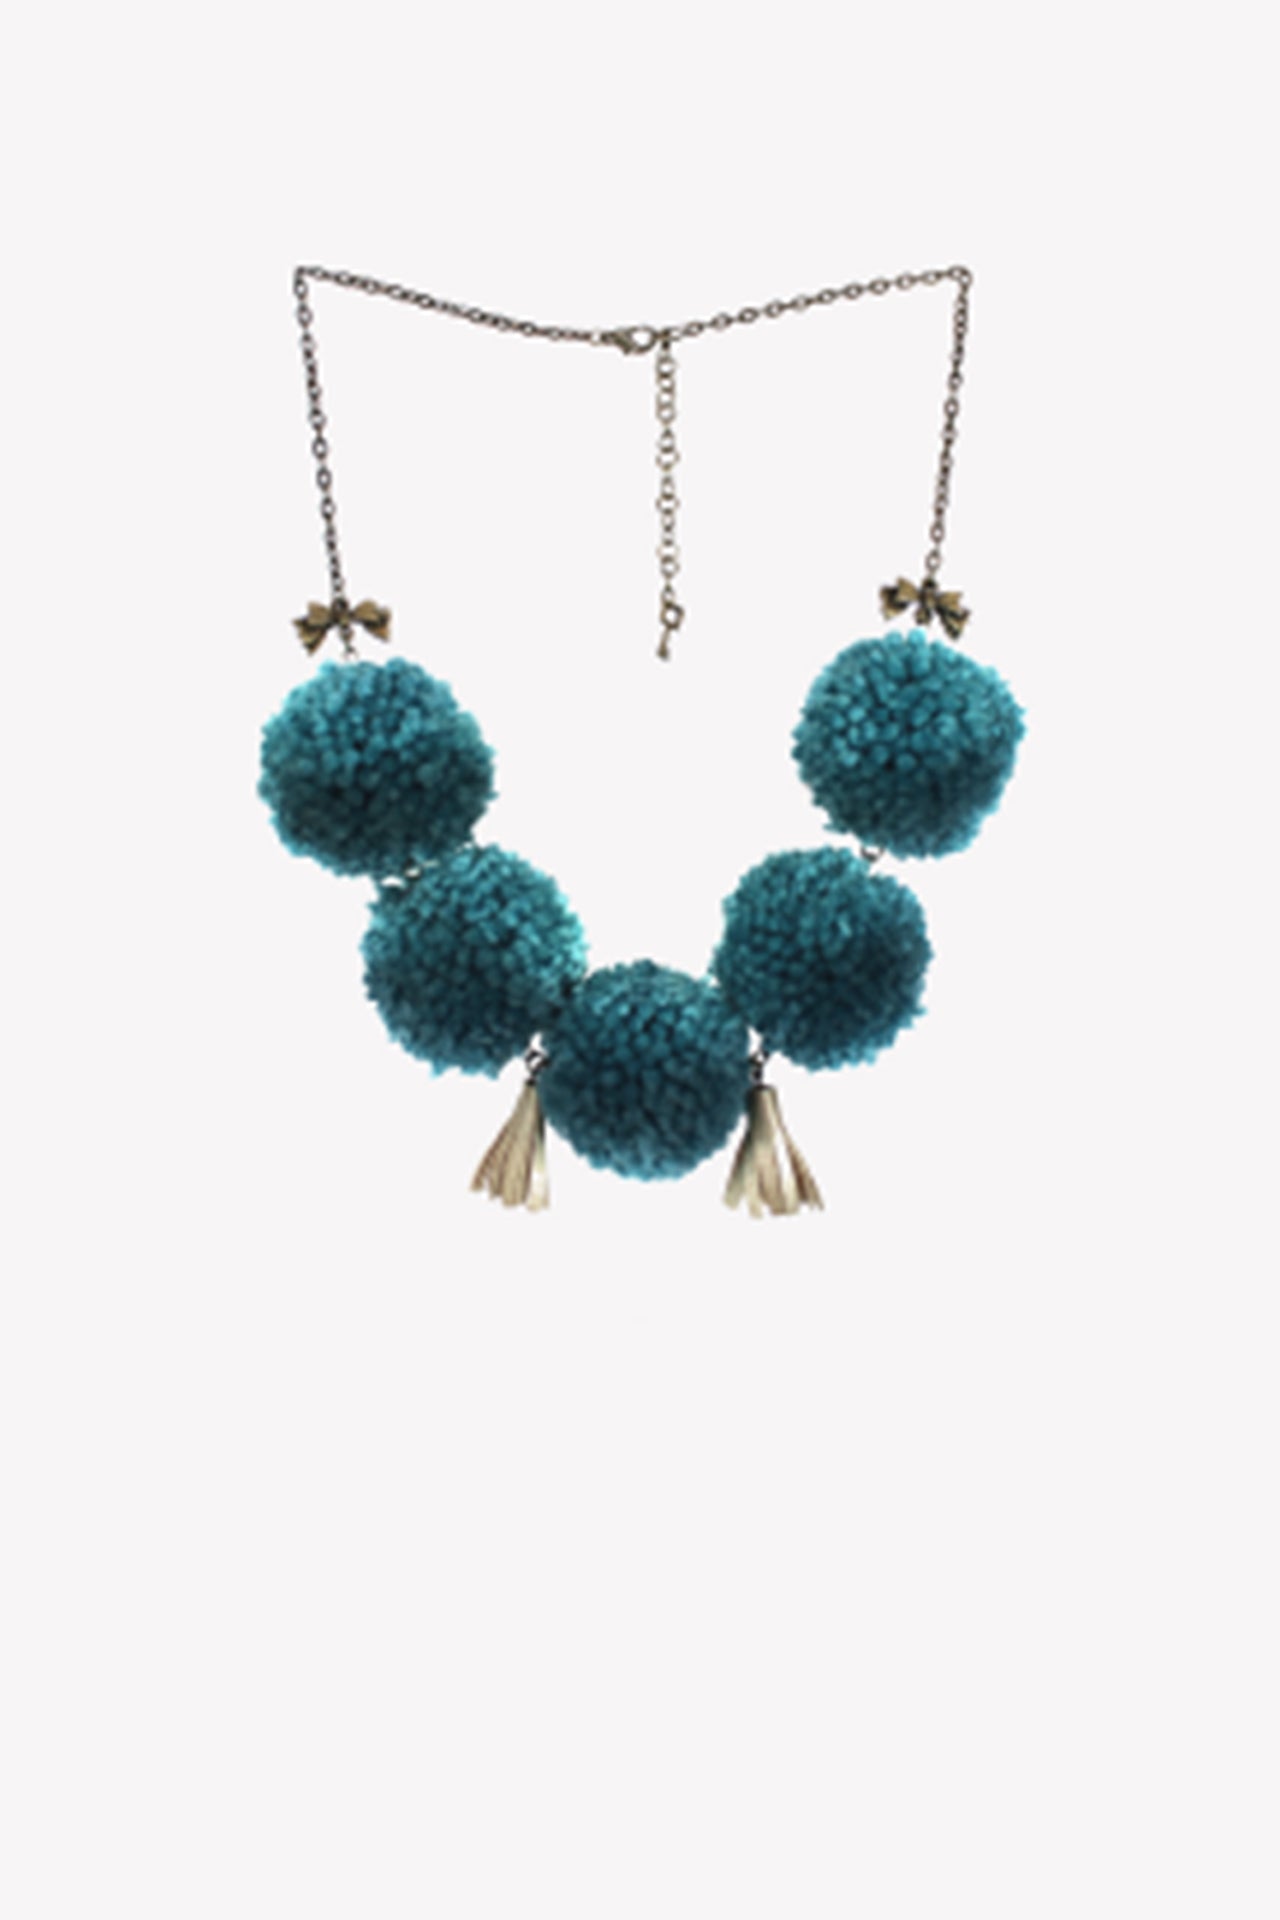 Short statement necklace with turquoise pompoms, sequins, leather tassels and gold bow charms